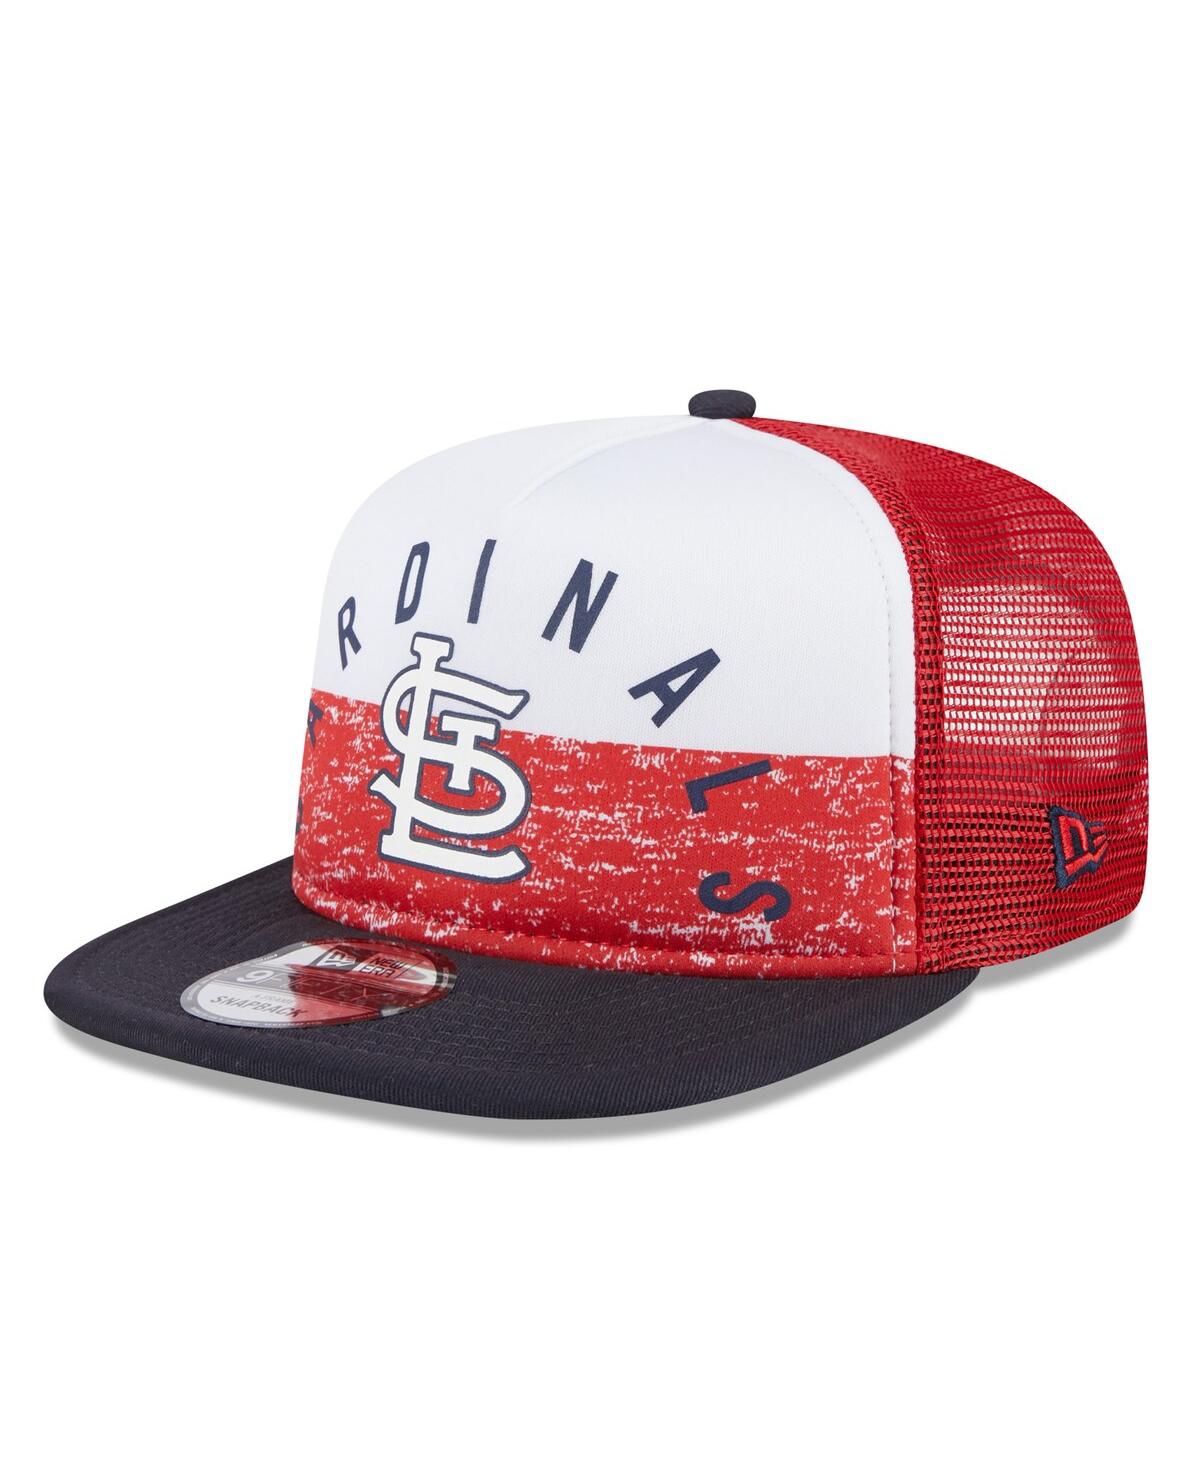 Men's White/Red St. Louis Cardinals Team Foam Front A-Frame Trucker 9Fifty Snapback Hat - White Red